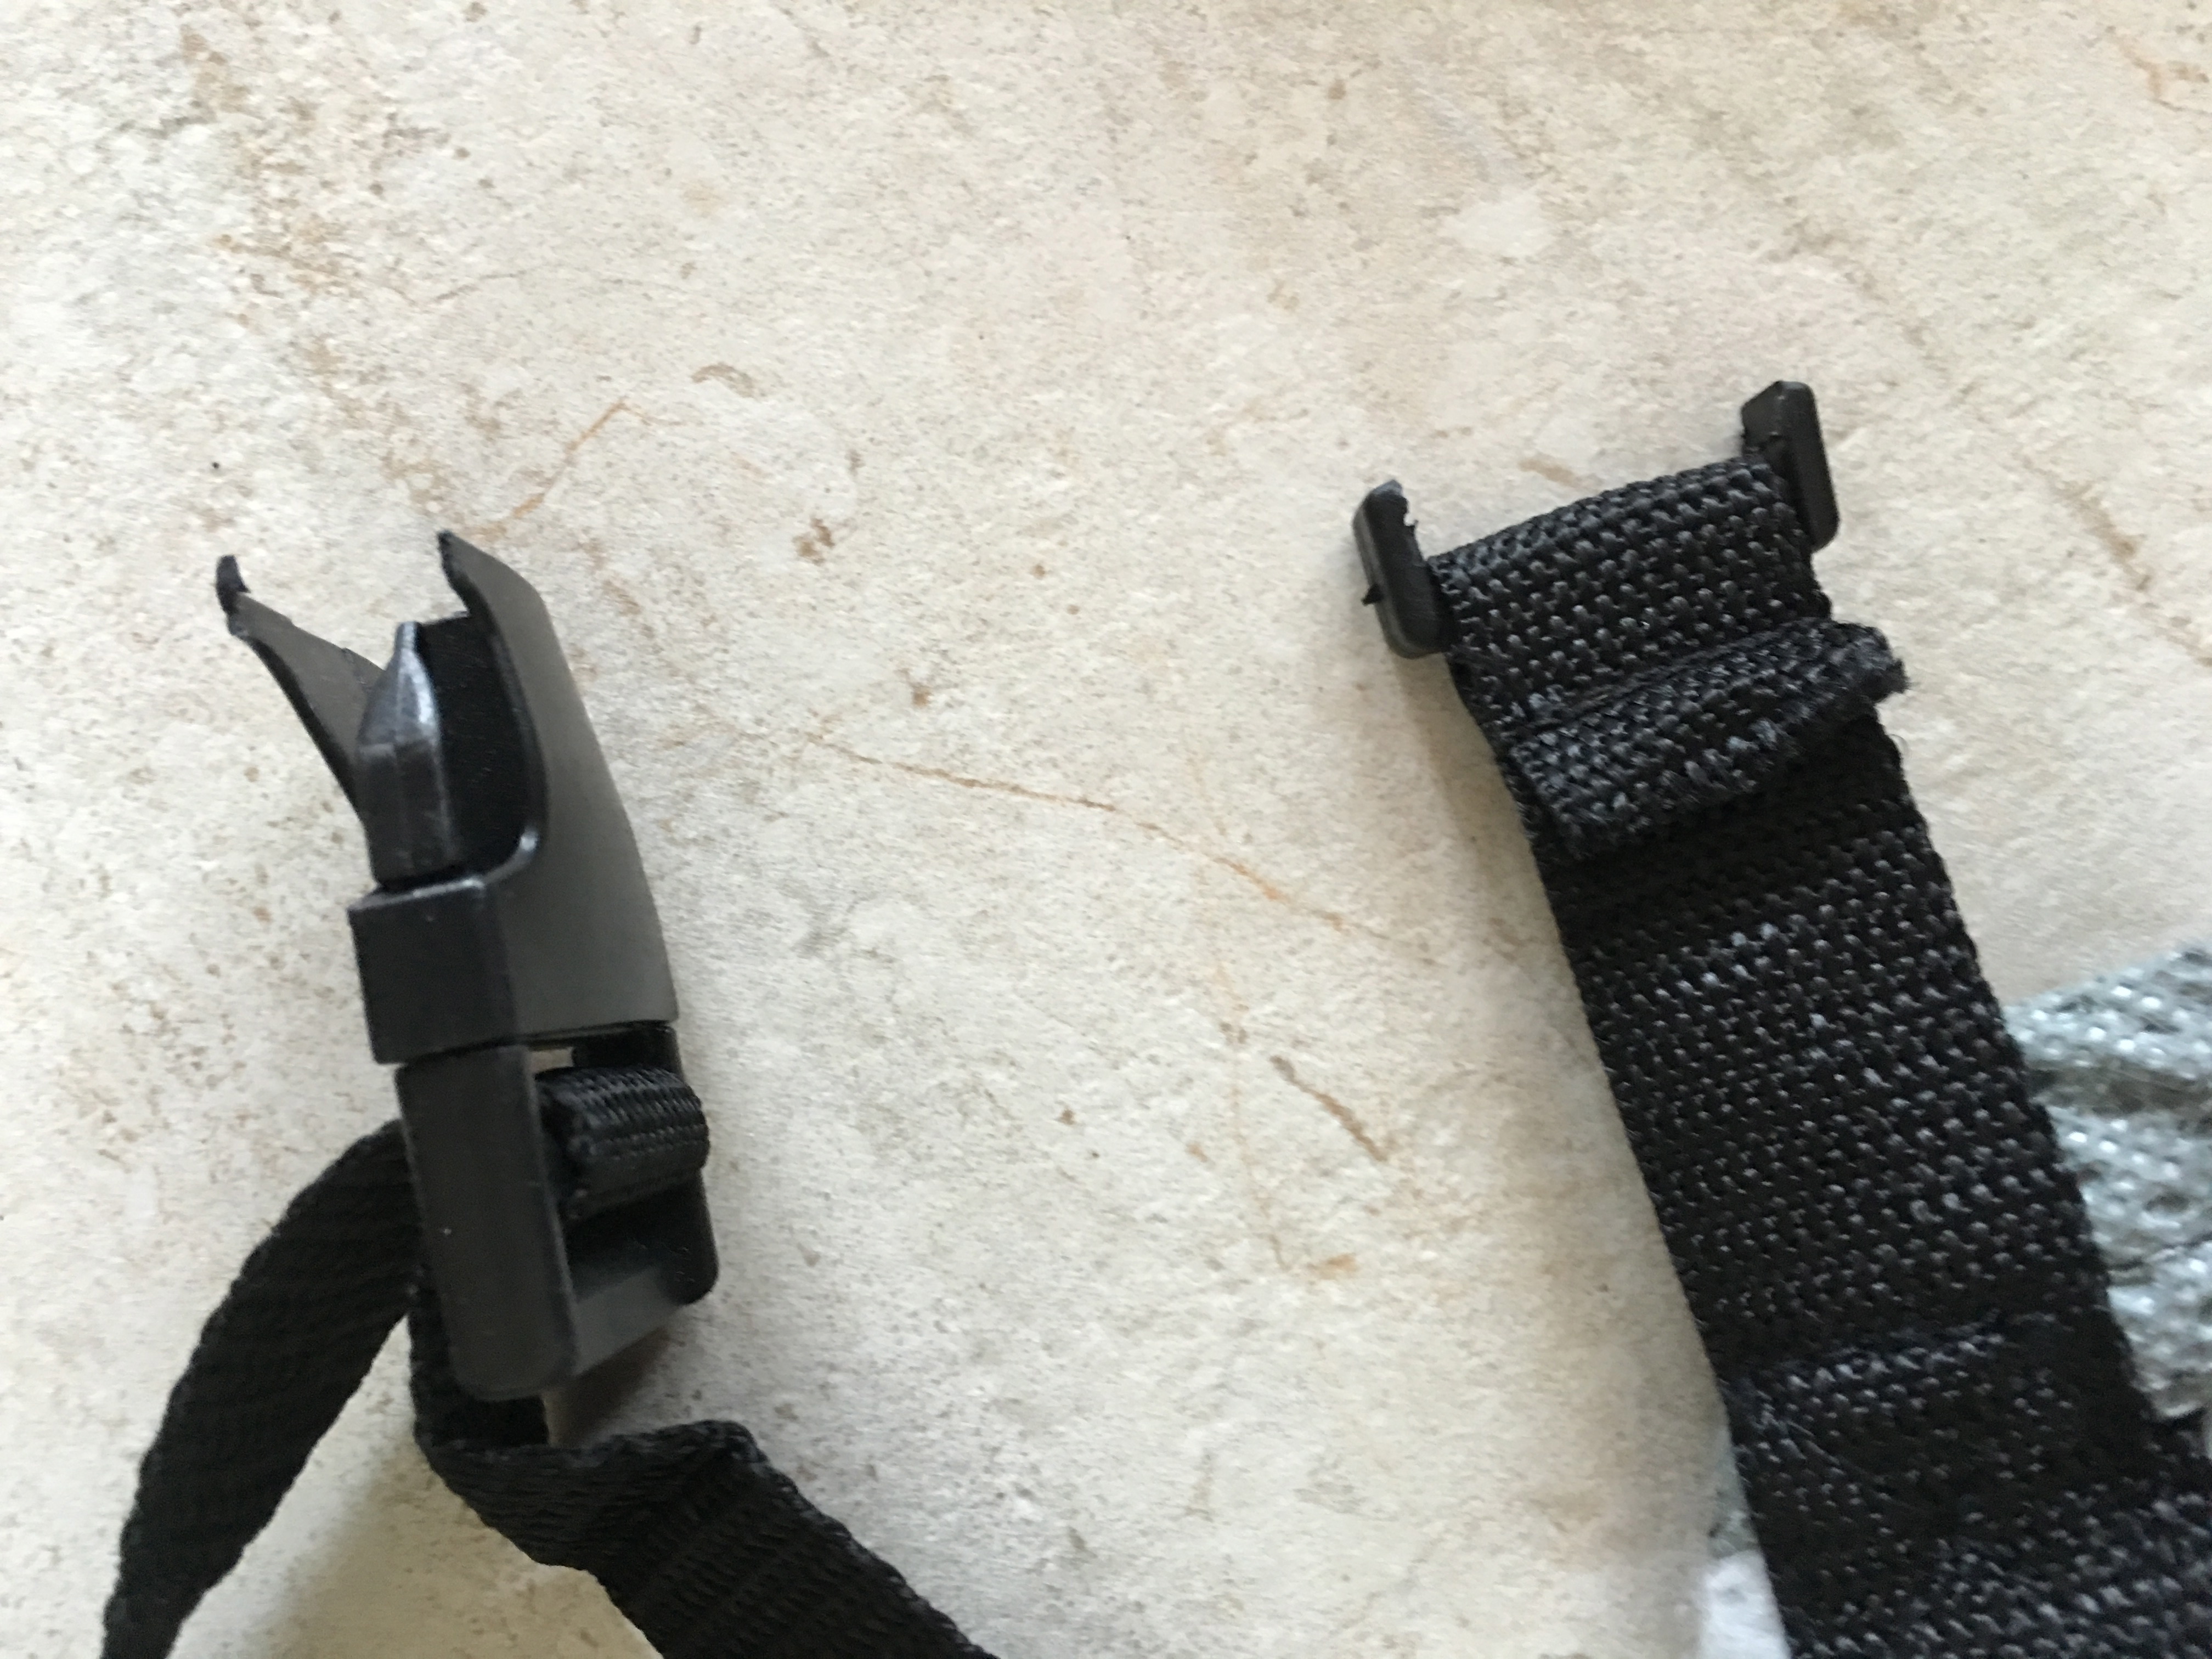 the two cheap broken buckles which need to be intact to snap or buckle together to hold the cover down from side to side under the vehicle.